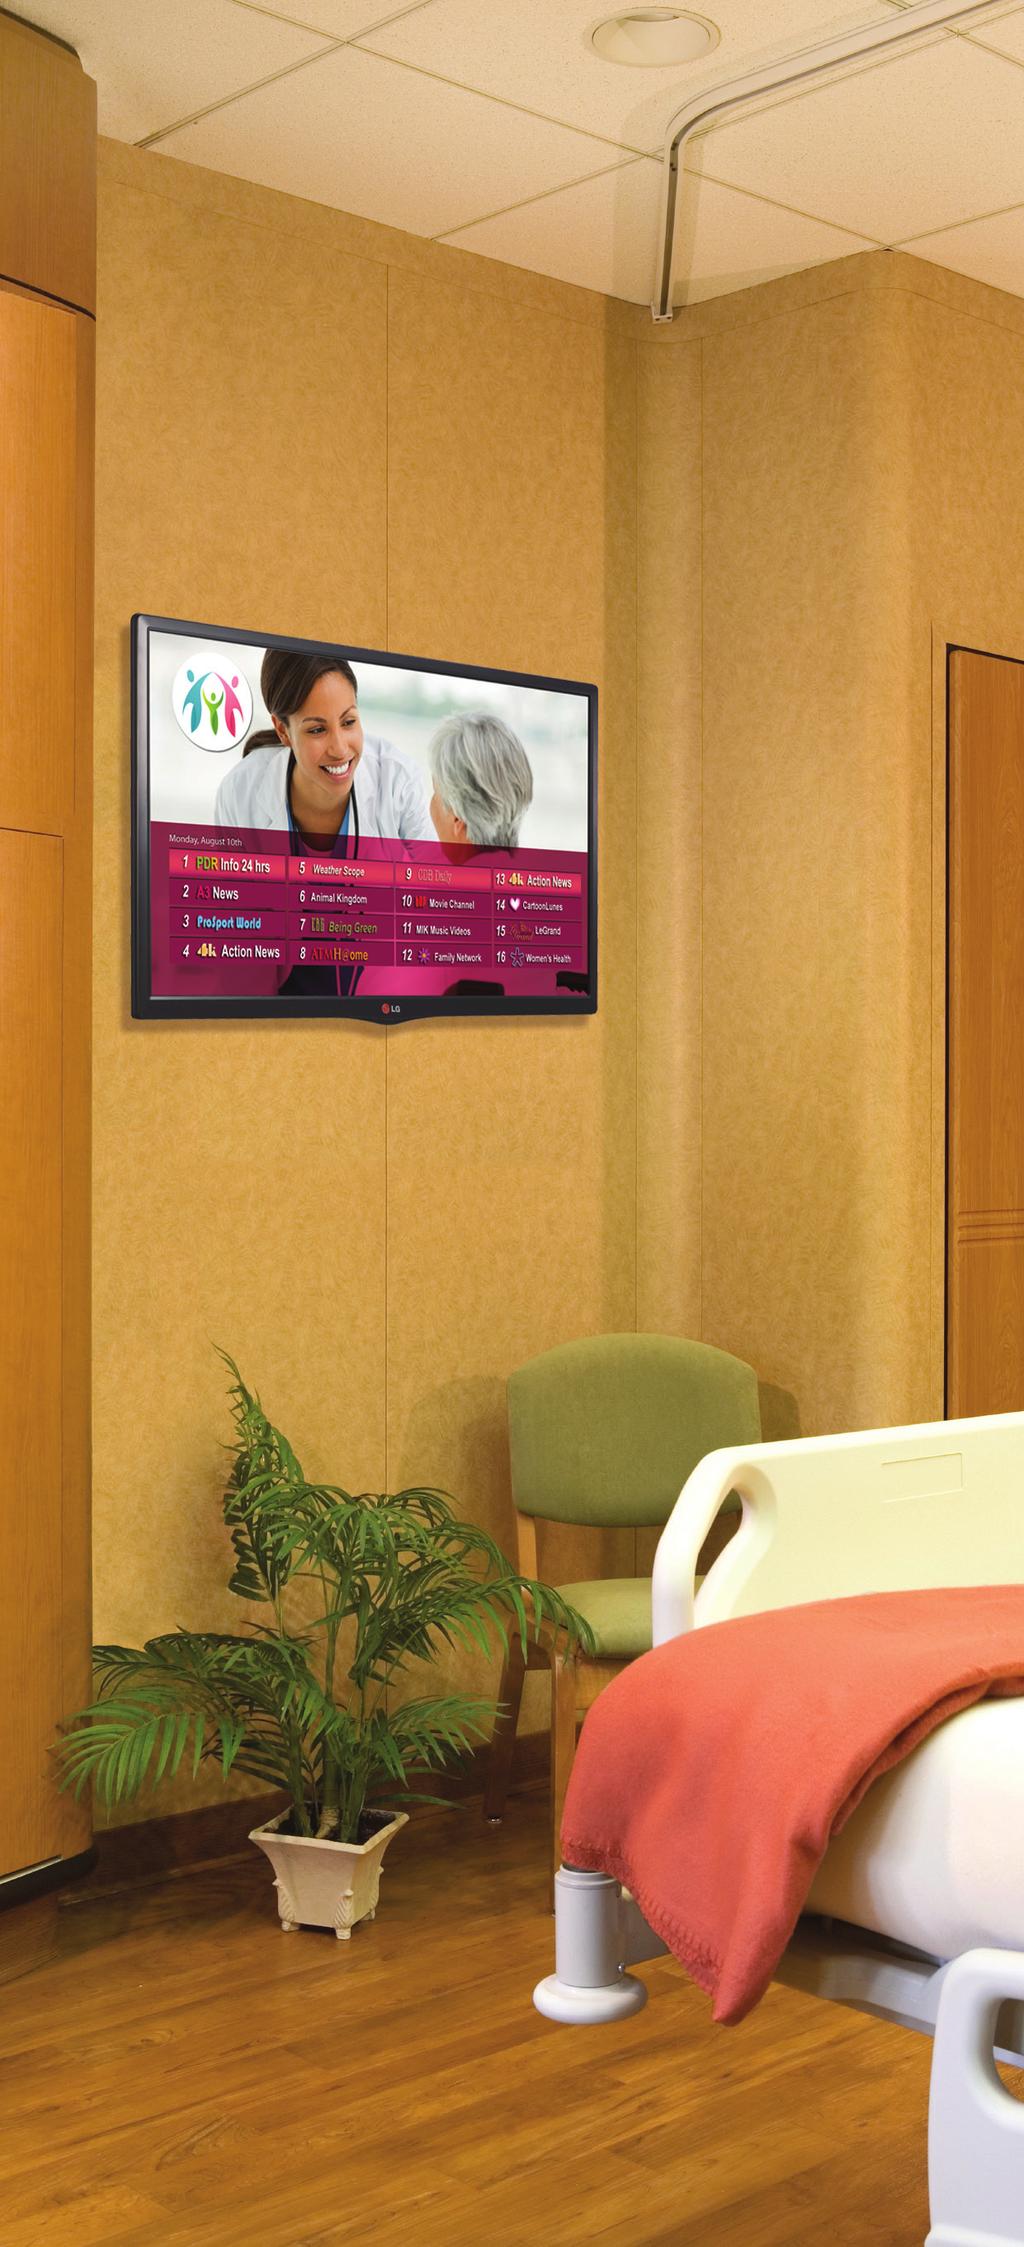 2 What Is Required to Install and Maintain LG TVs in LTC and Senior Living Facilities?